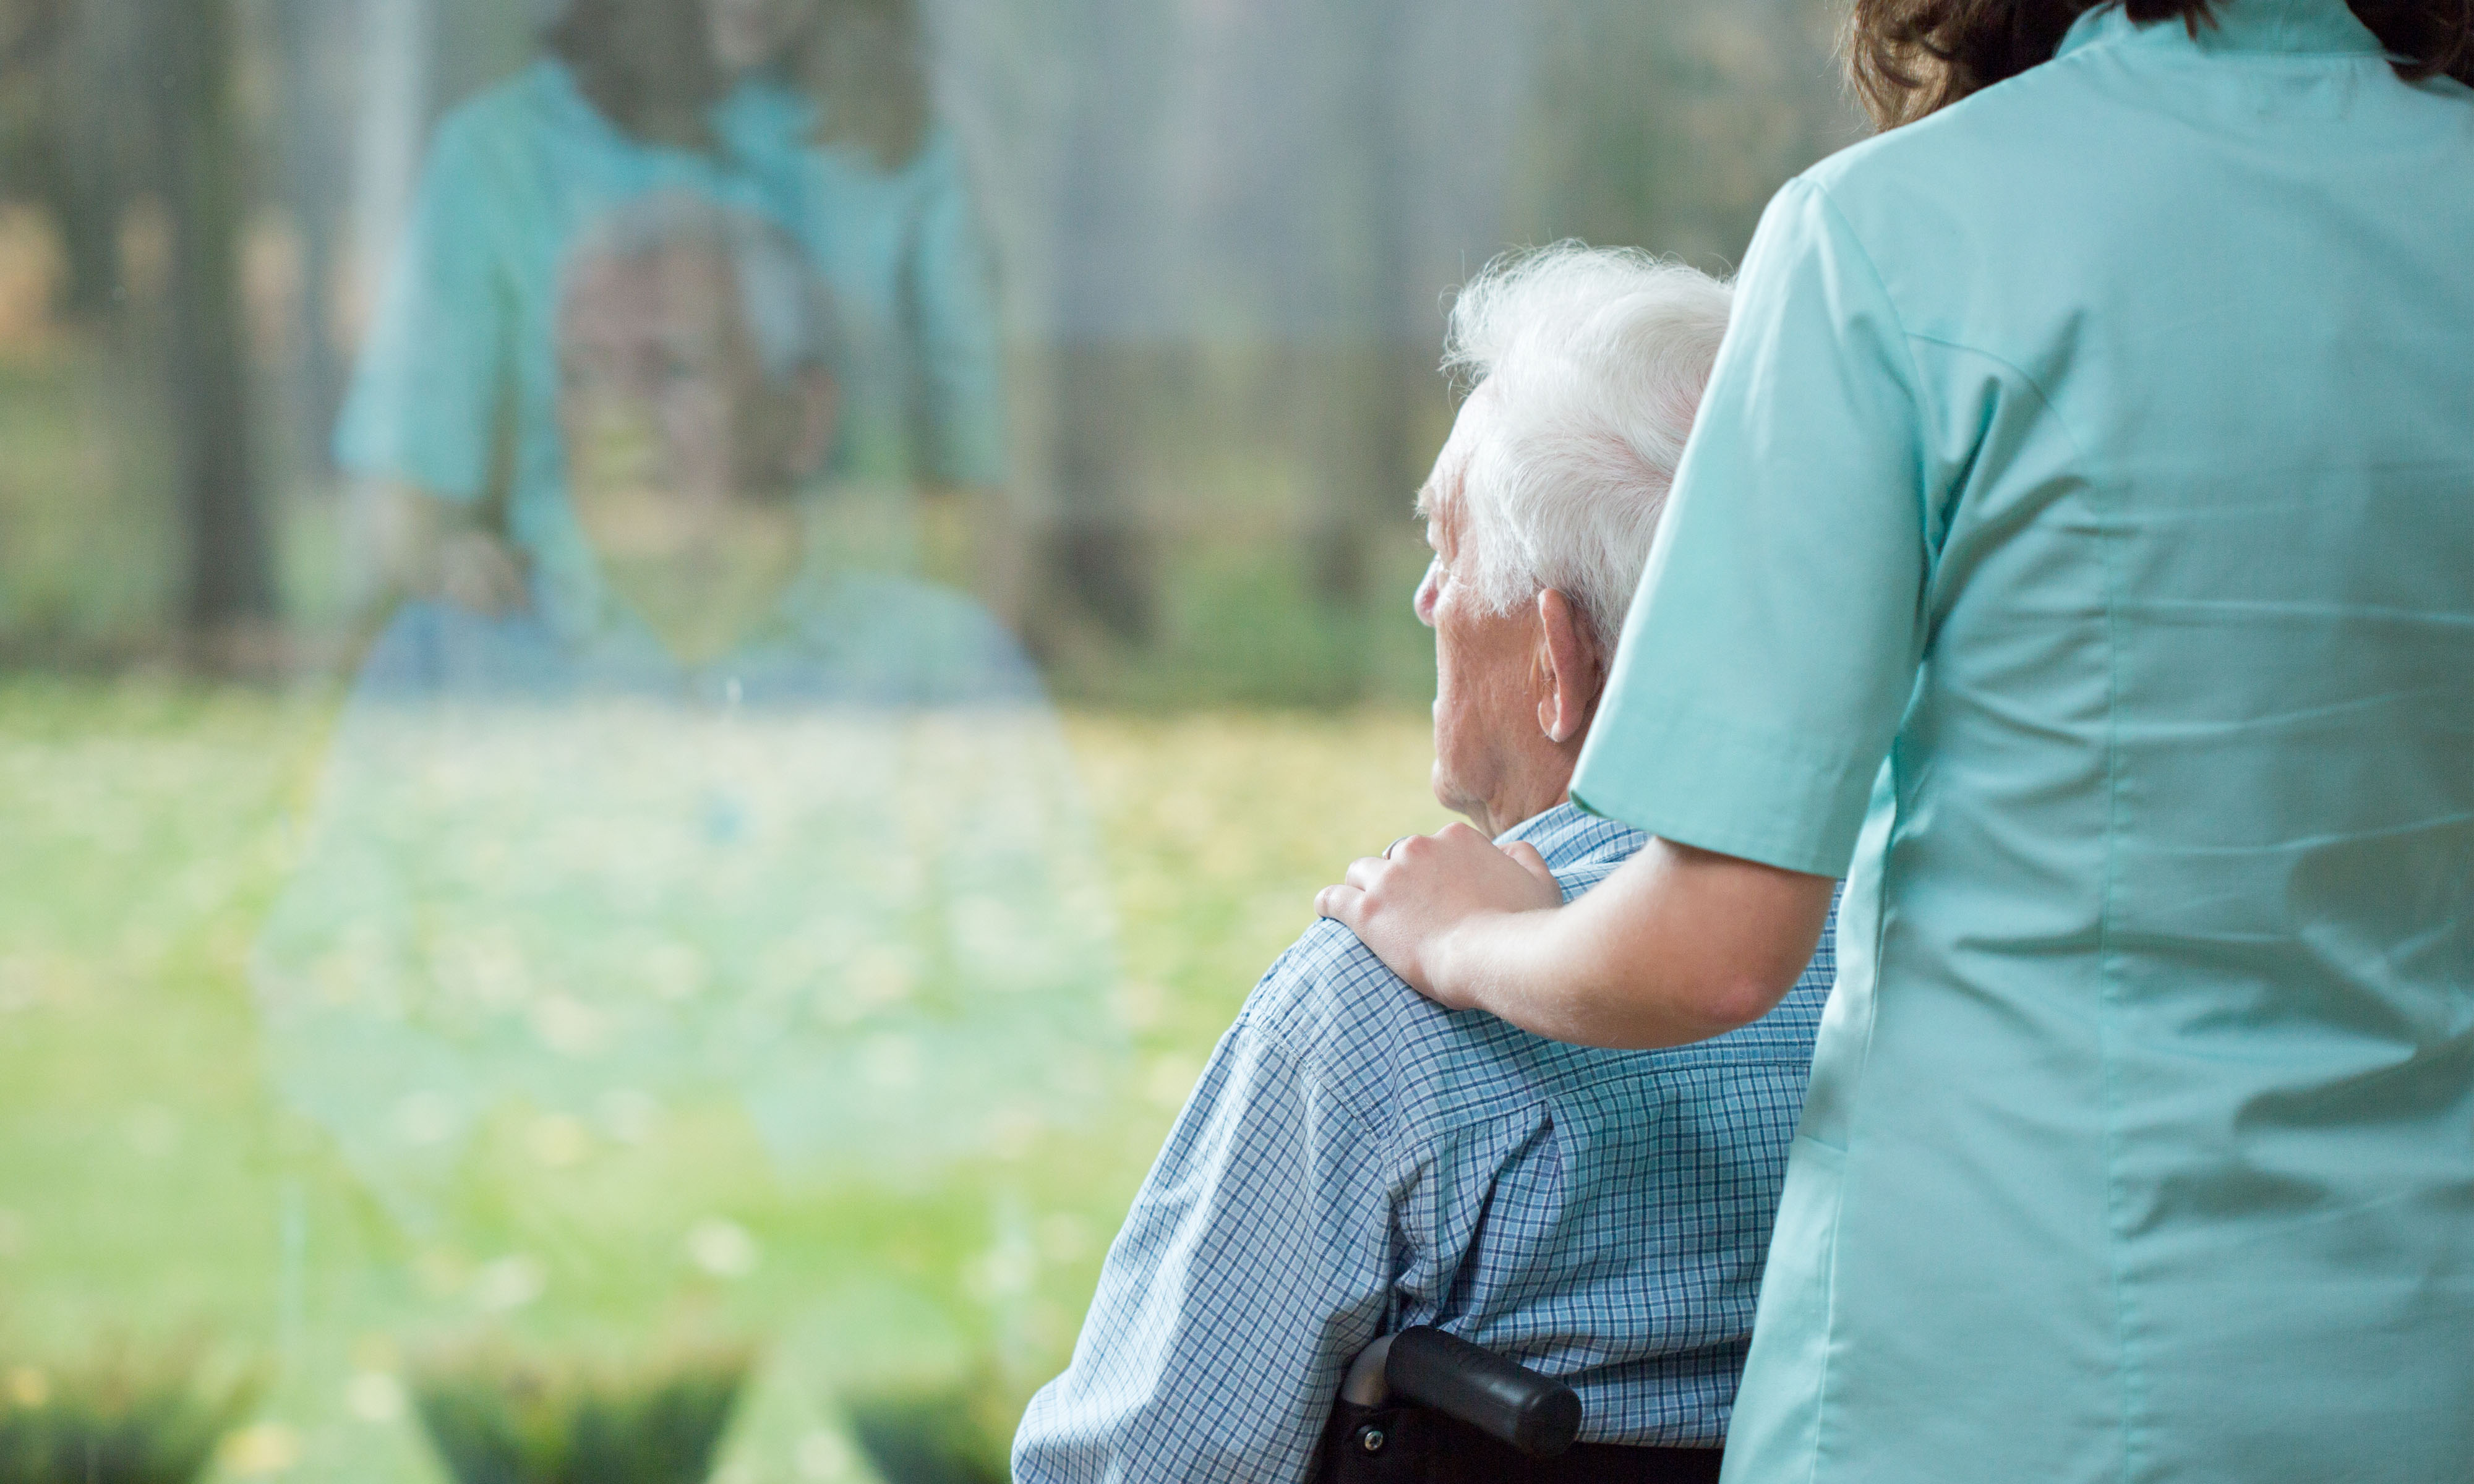 Learn more about ANX Hospice Care